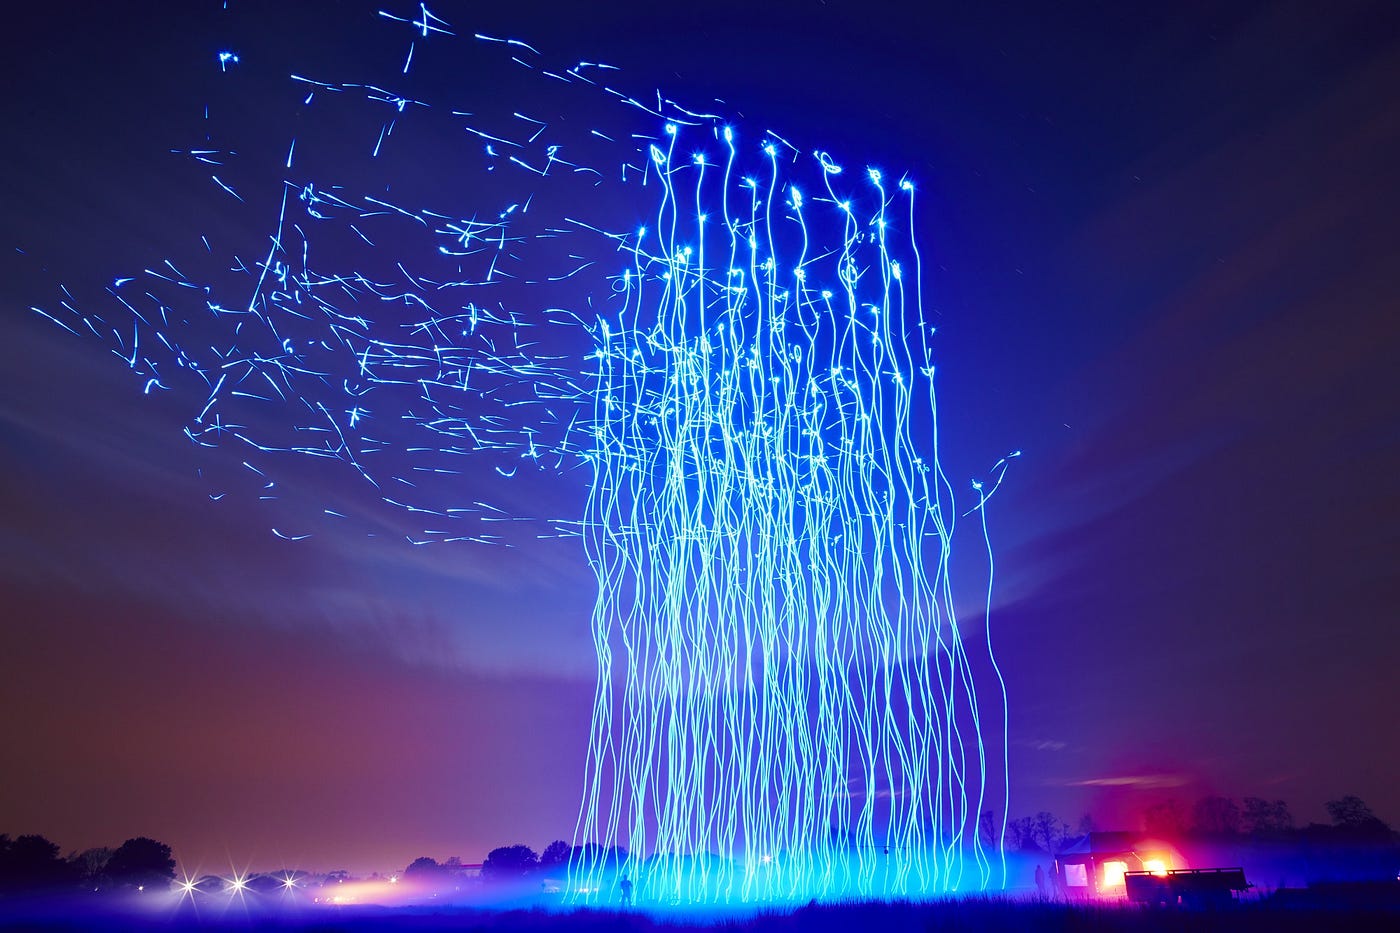 Drone Light Shows “Better in Every Way” Than Fireworks | by  𝐆𝐫𝐫𝐥𝐒𝐜𝐢𝐞𝐧𝐭𝐢𝐬𝐭, scientist & writer | The Startup | Medium